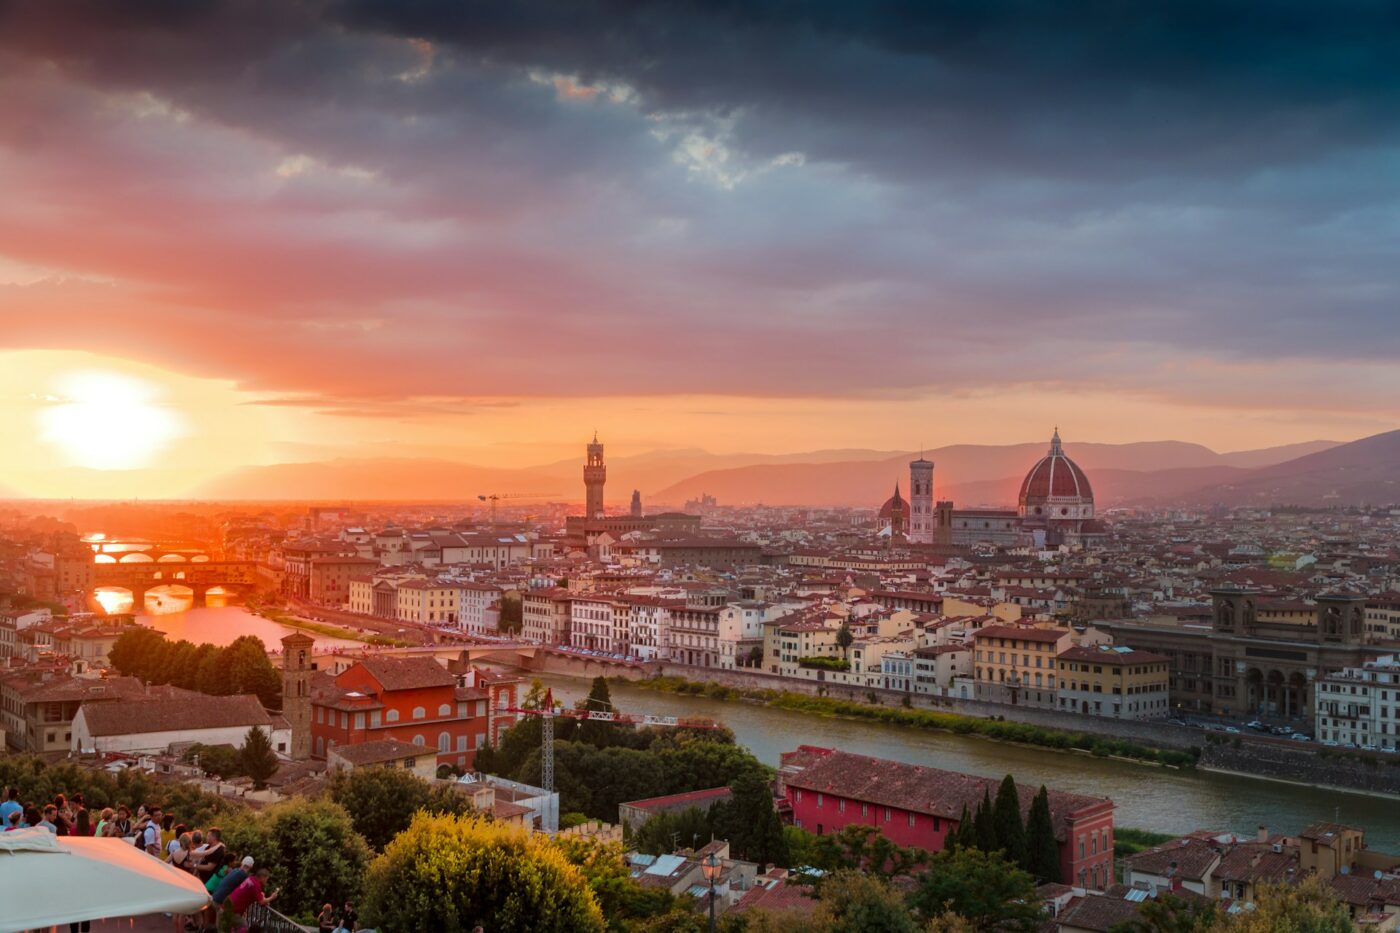 Golden hour in Florence, Italy